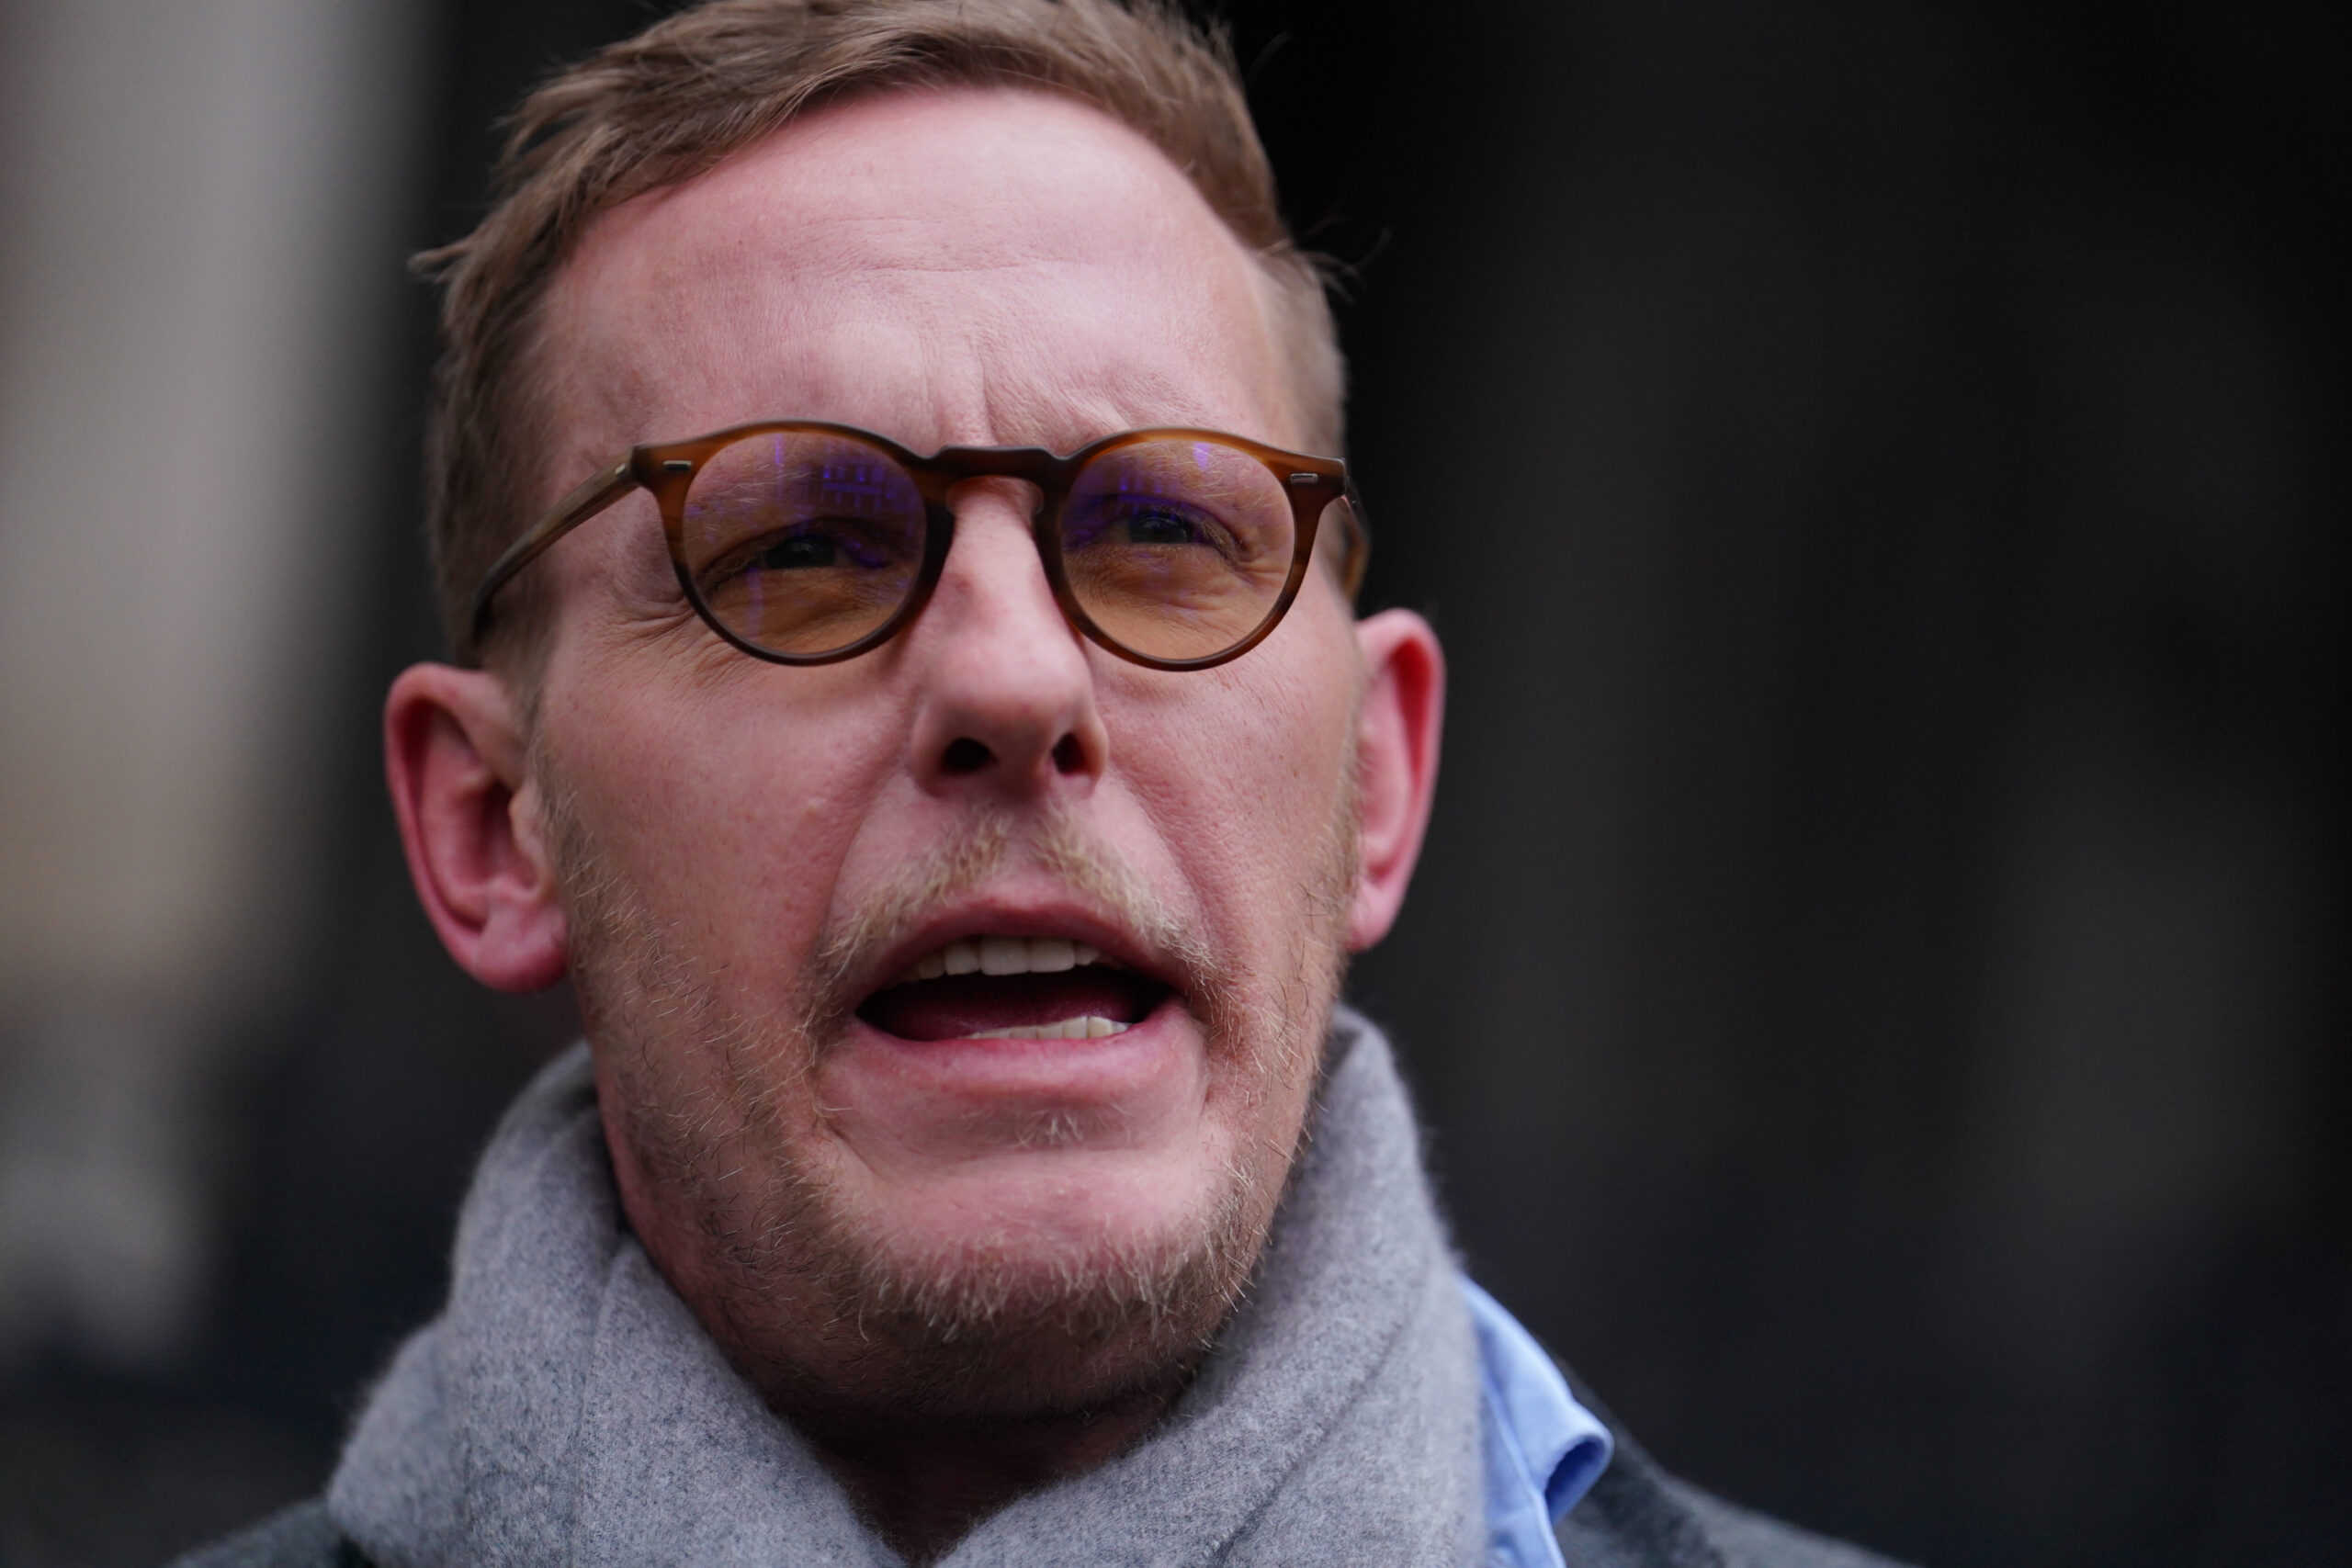 HeRe wE Go AgaIN! Laurence Fox suing man who called him ‘racist’ on social media